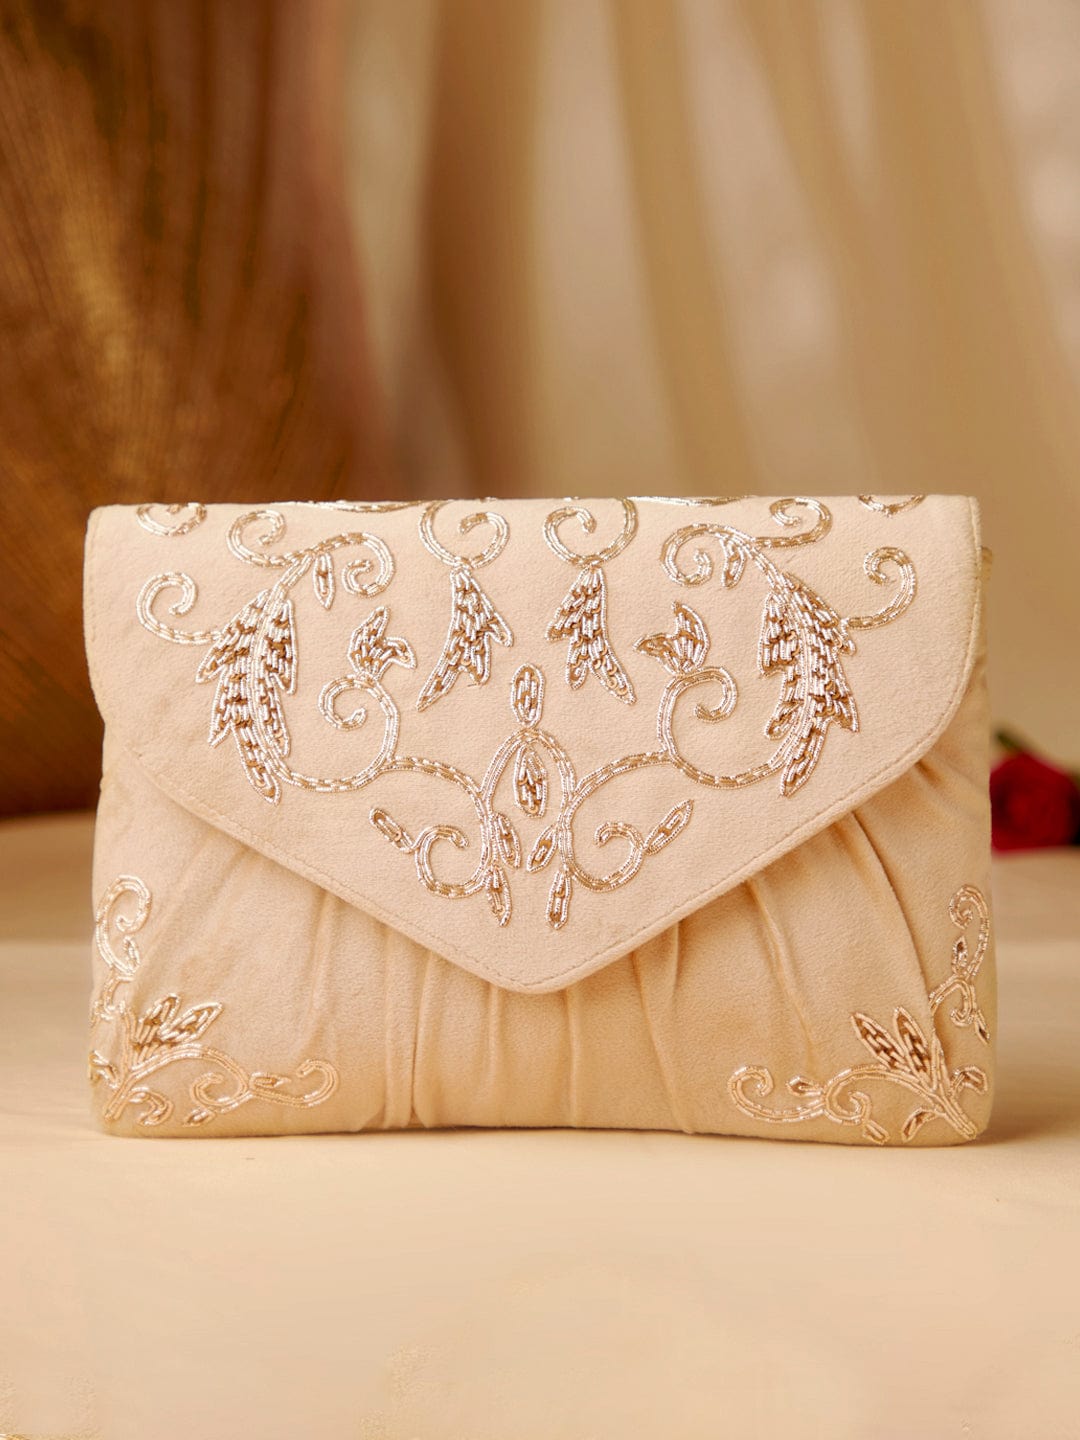 Rubans Cream Colour Slingbag With Embroided Gold And Brown Design. Handbag & Wallet Accessories